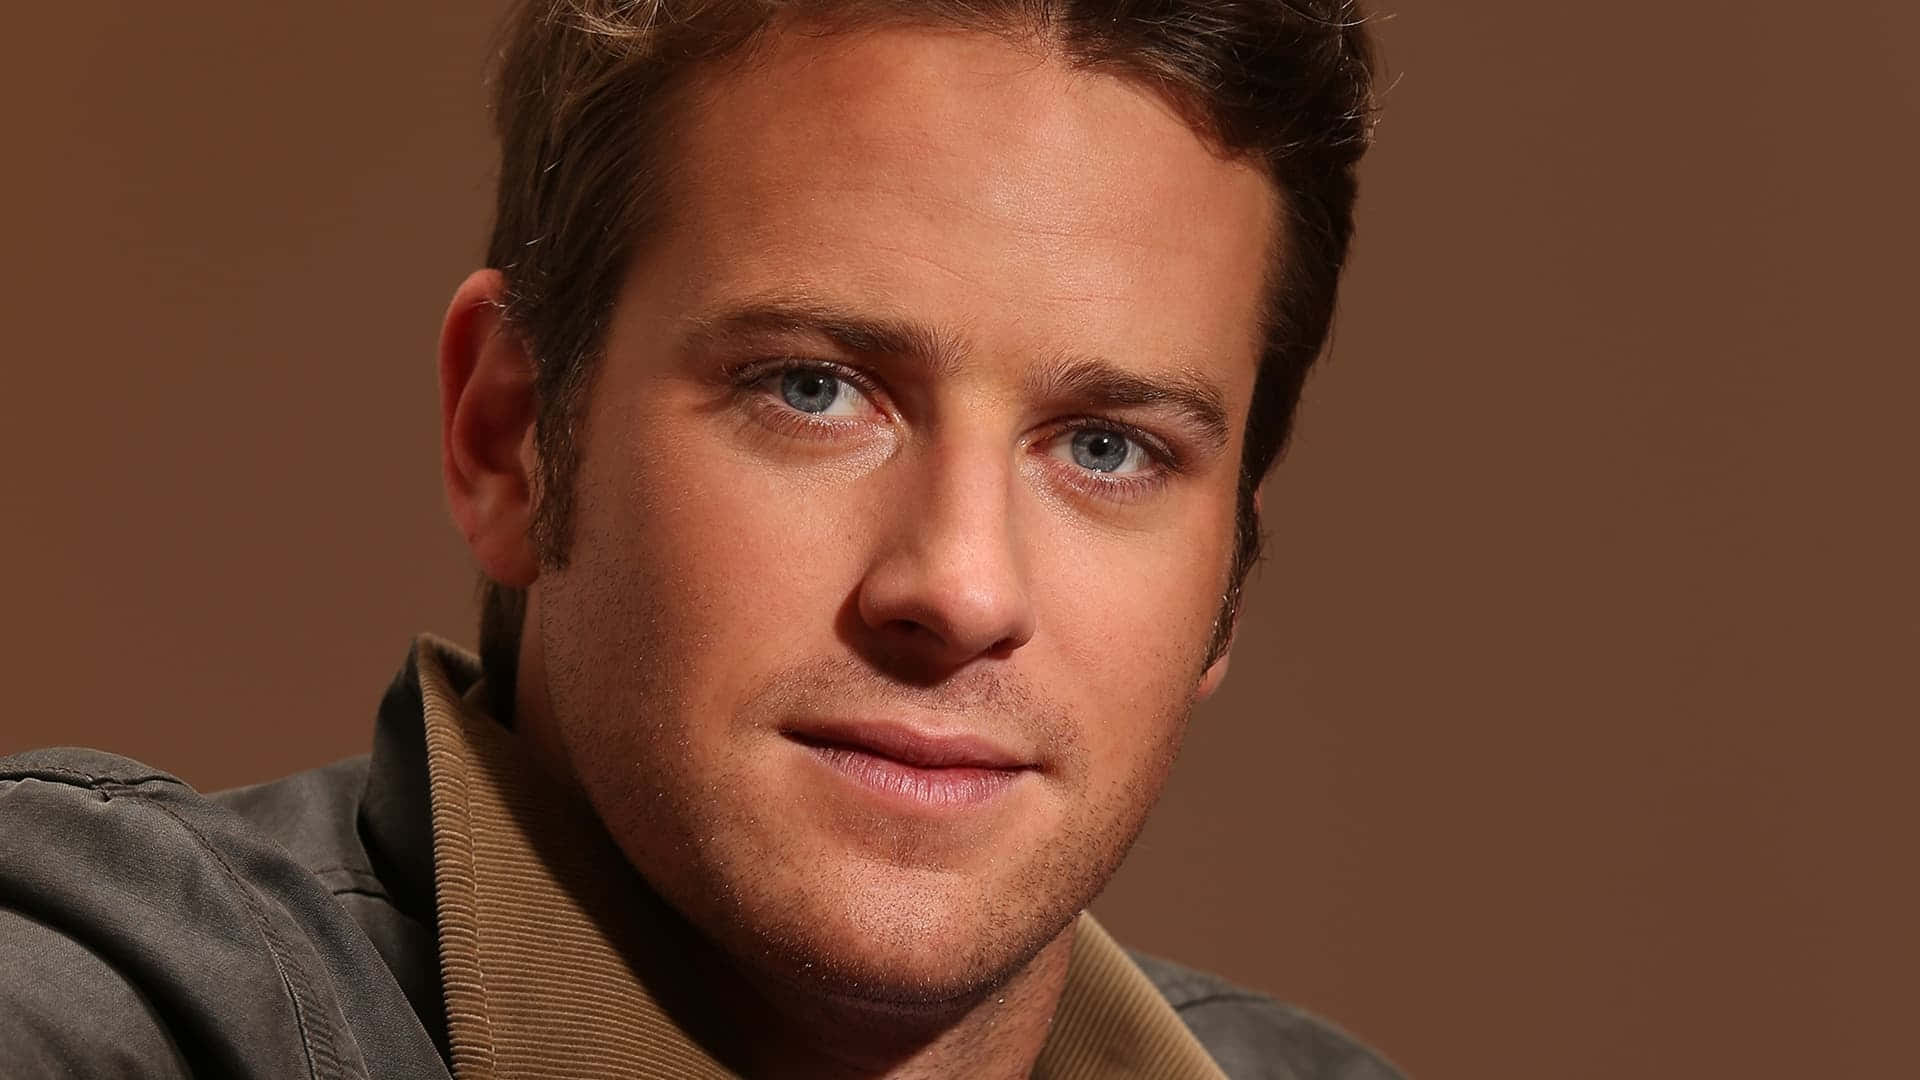 Actor Armie Hammer in a confident pose.